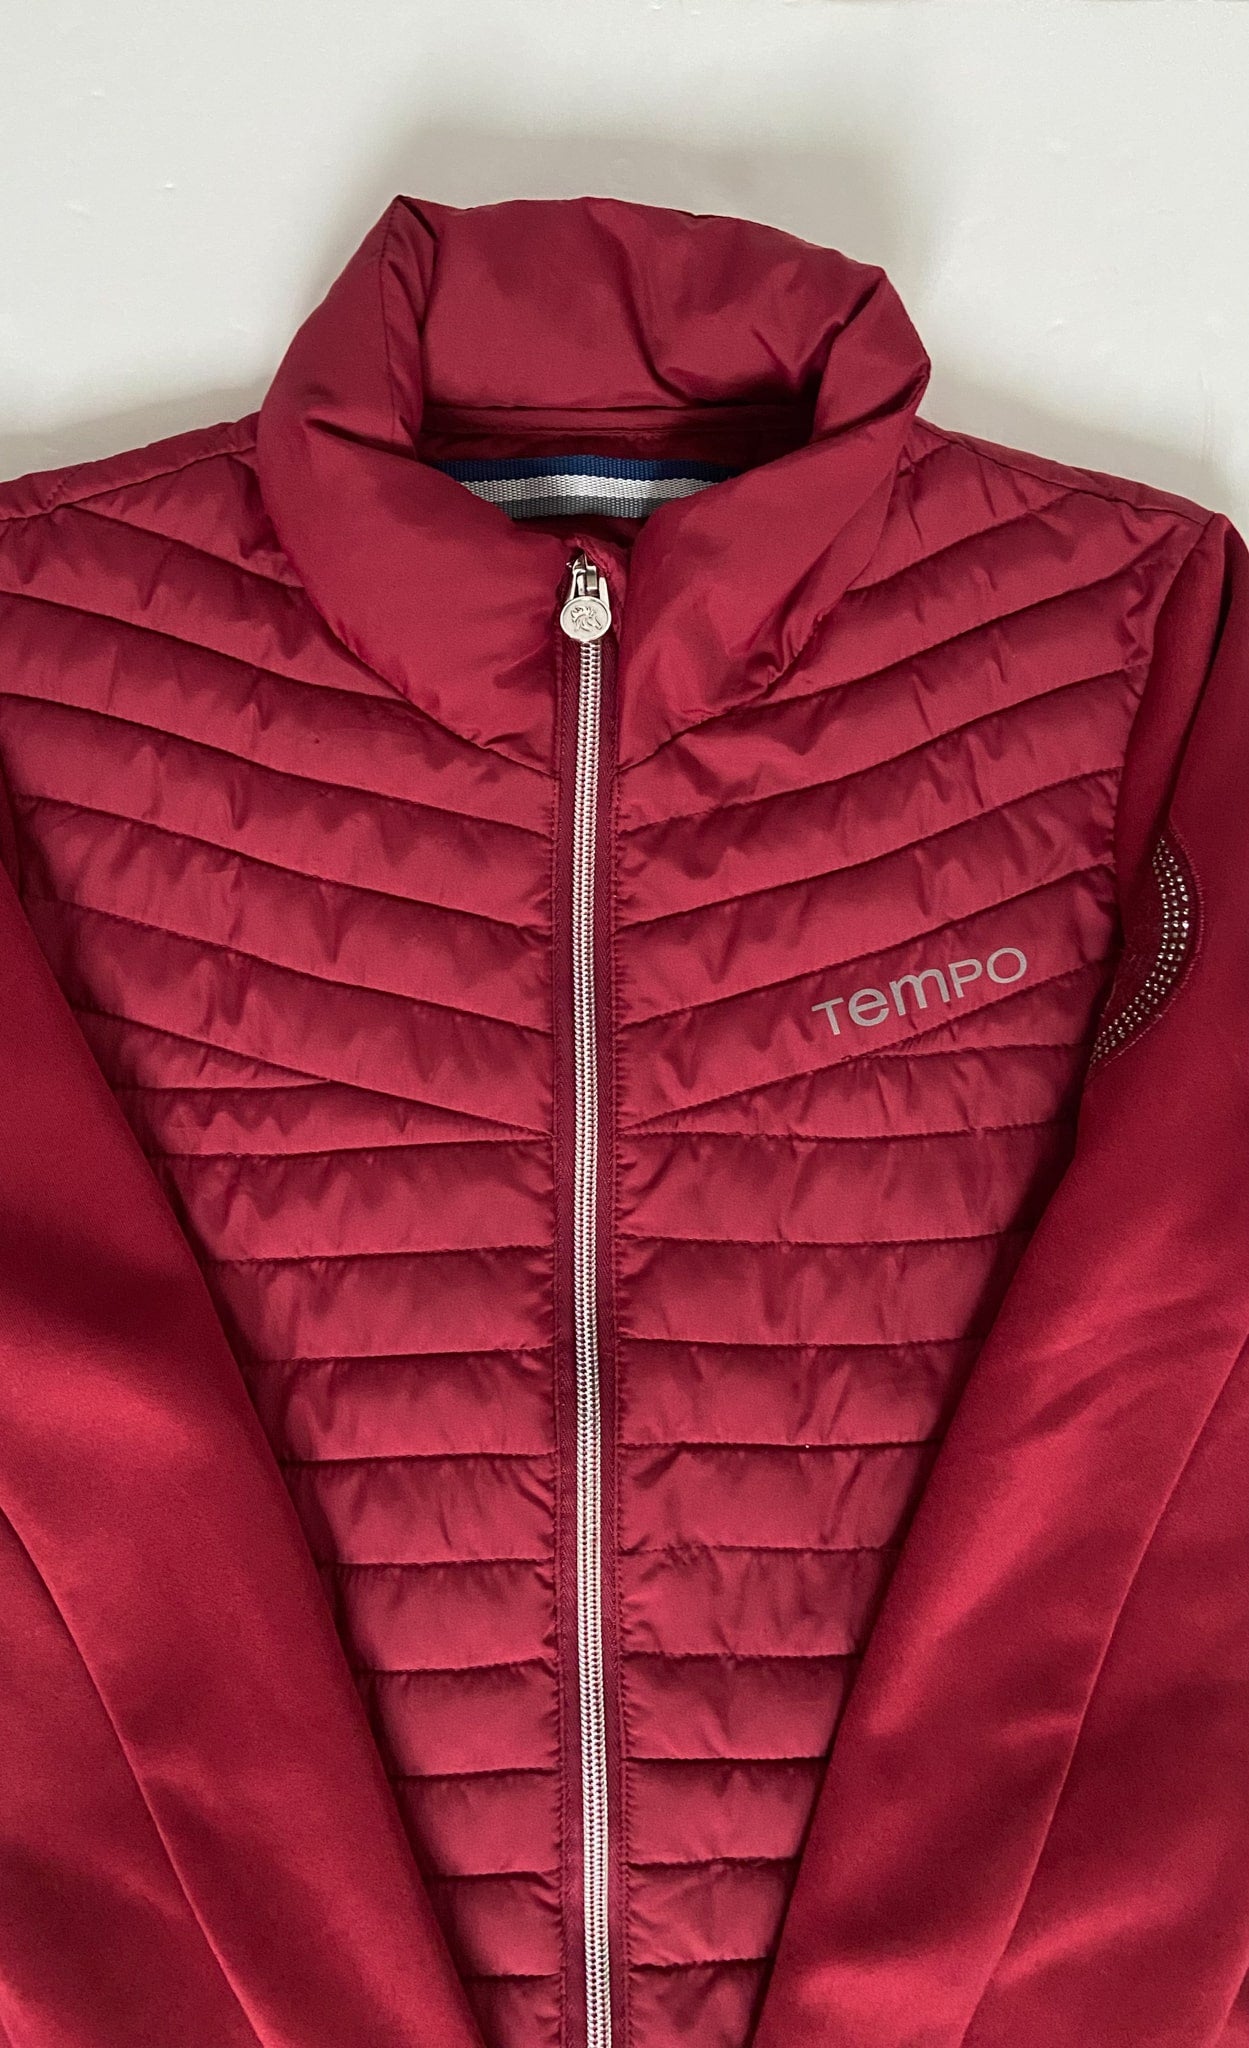 Tempo Equestrian Jacket - Red - Women's XS